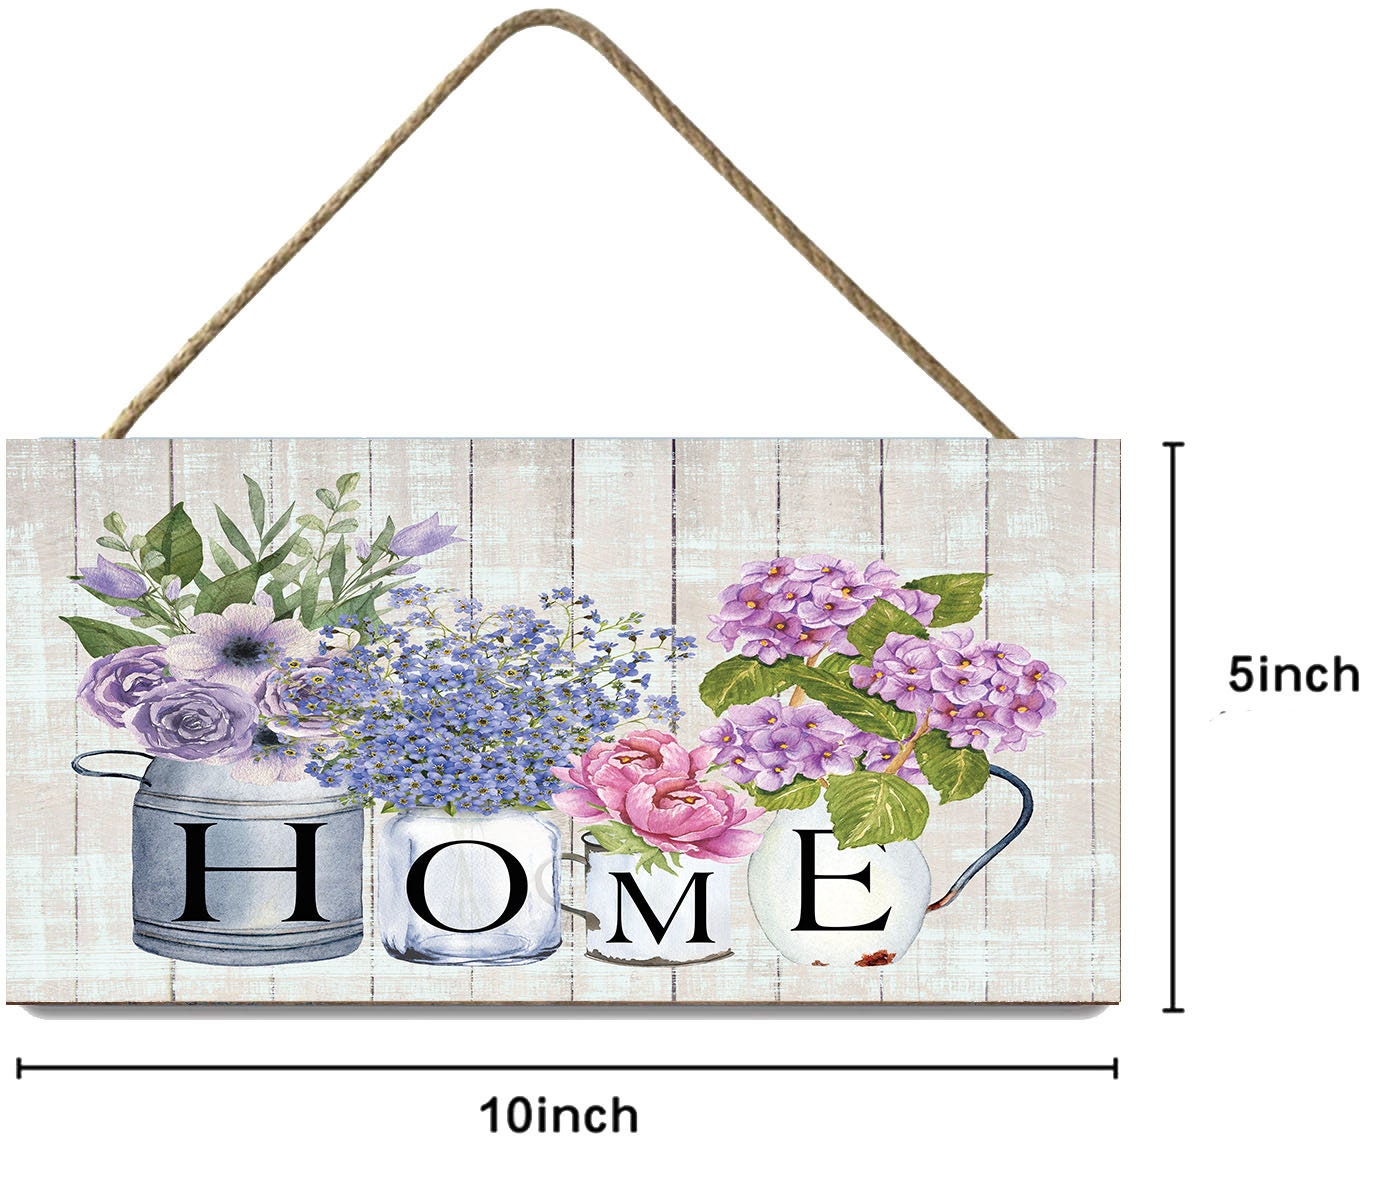 Floral Home Handmade Wood Sign